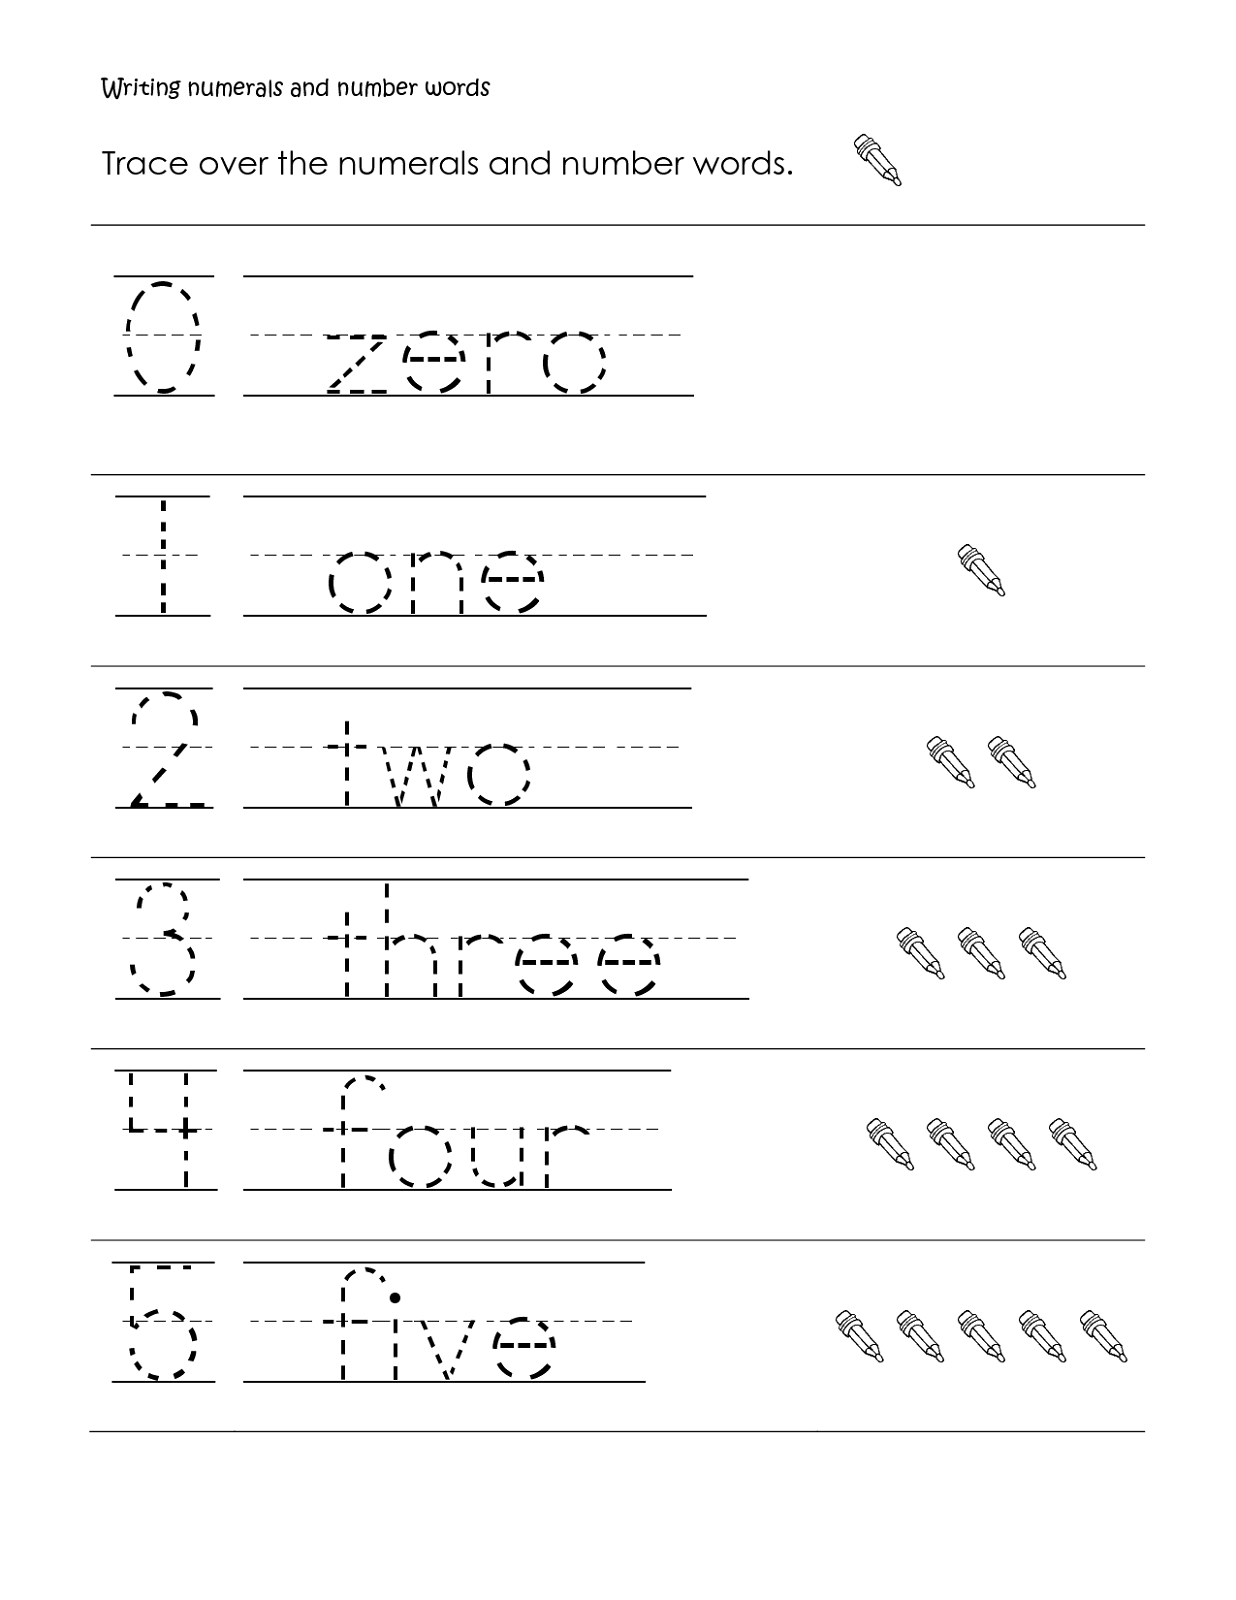 number-word-worksheets-trace